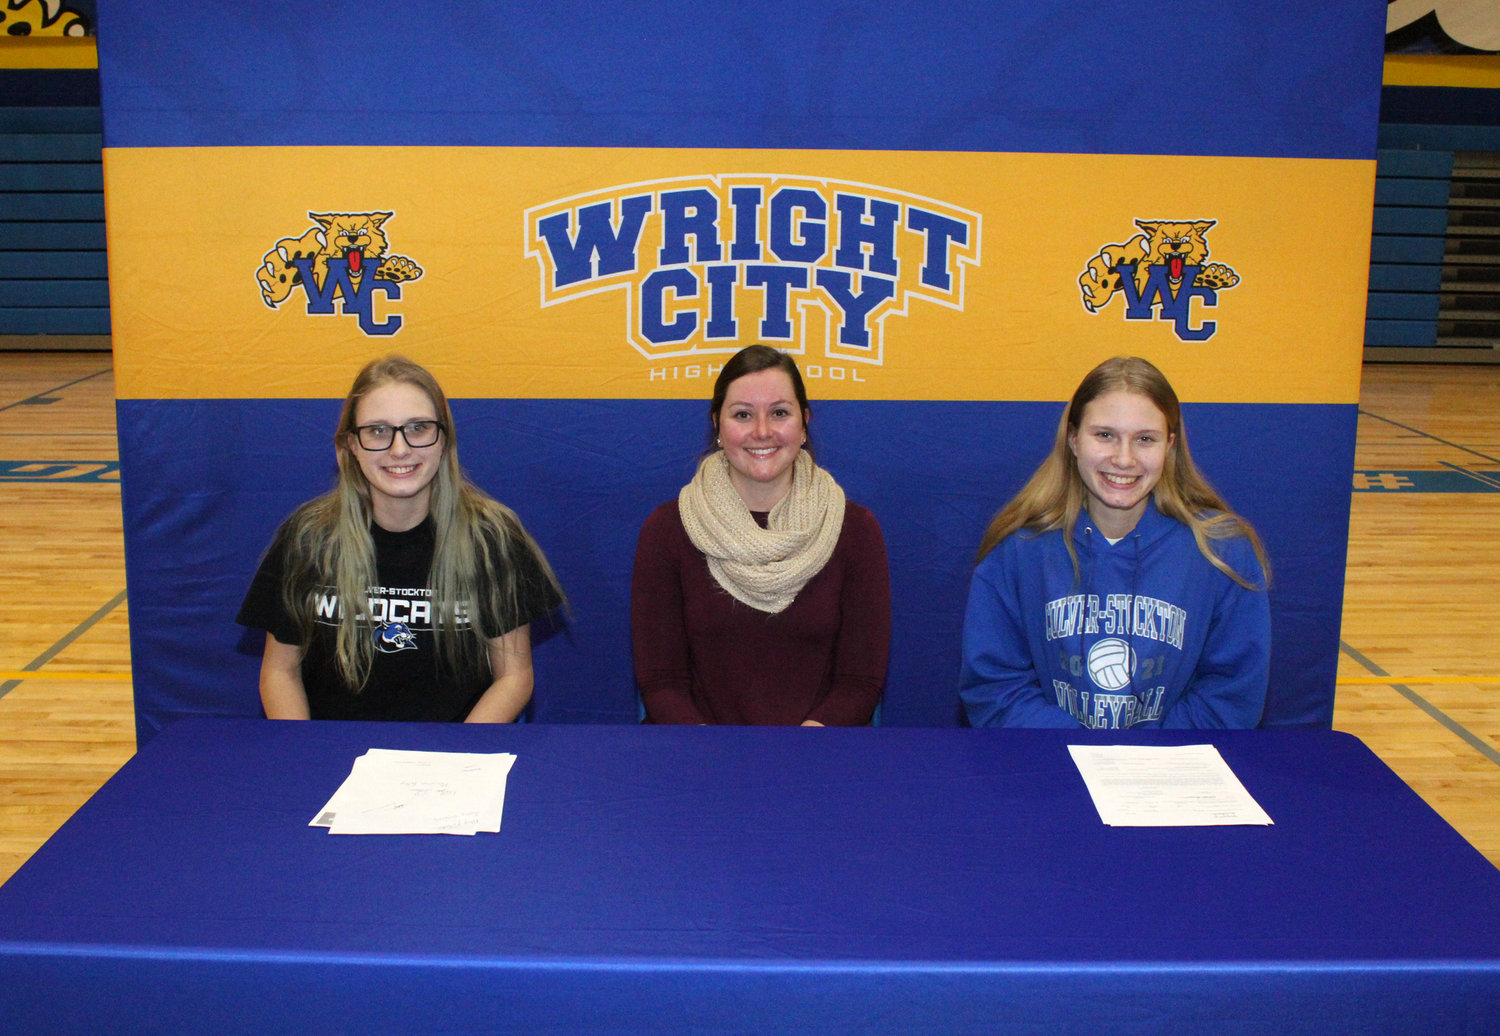 STILL WILDCATS — Wright City volleyball players Ashleigh Williams, left, and Emily Williams, far right, signed their letters of intent to play volleyball for Culver-Stockton College on Feb. 3, joined by a small group of family and supporters. Also pictured is Wright City Head Coach Christine Klem.        Derrick Forsythe photo.